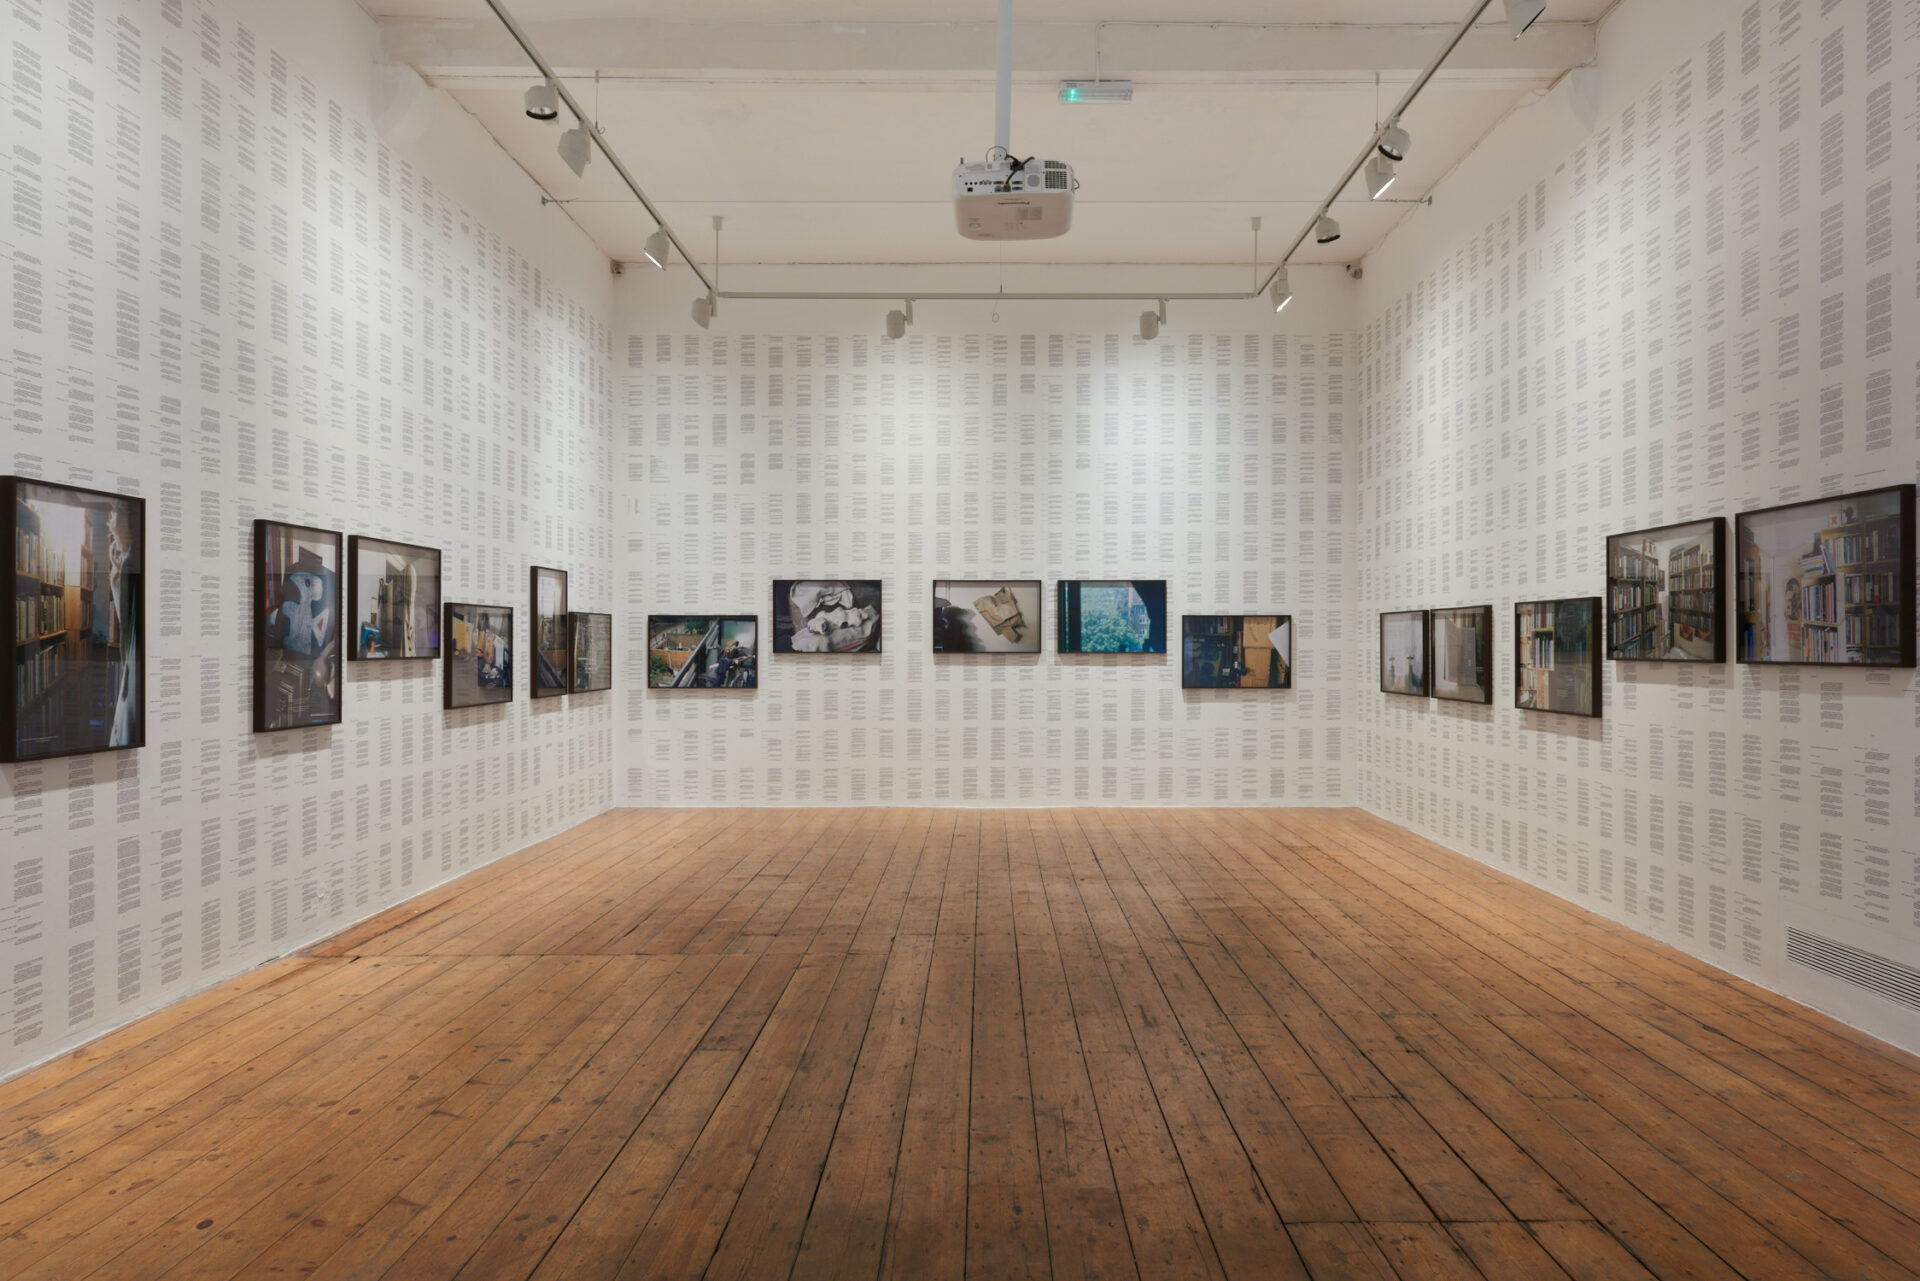 Photographs of a poet's lived spaces are installed on walls papered with words